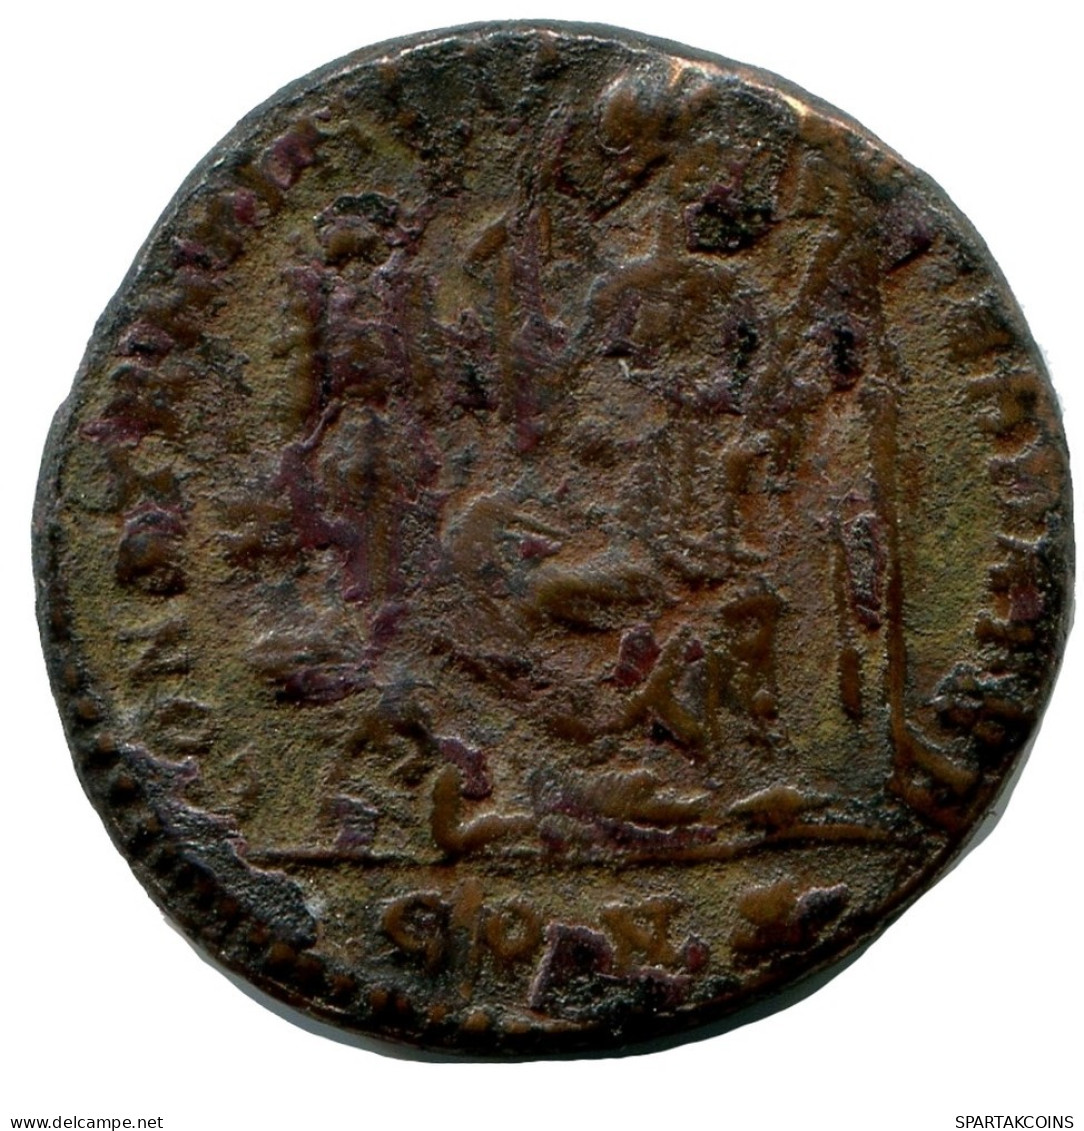 CONSTANTINE I MINTED IN CONSTANTINOPLE FOUND IN IHNASYAH HOARD #ANC10816.14.D.A - El Impero Christiano (307 / 363)